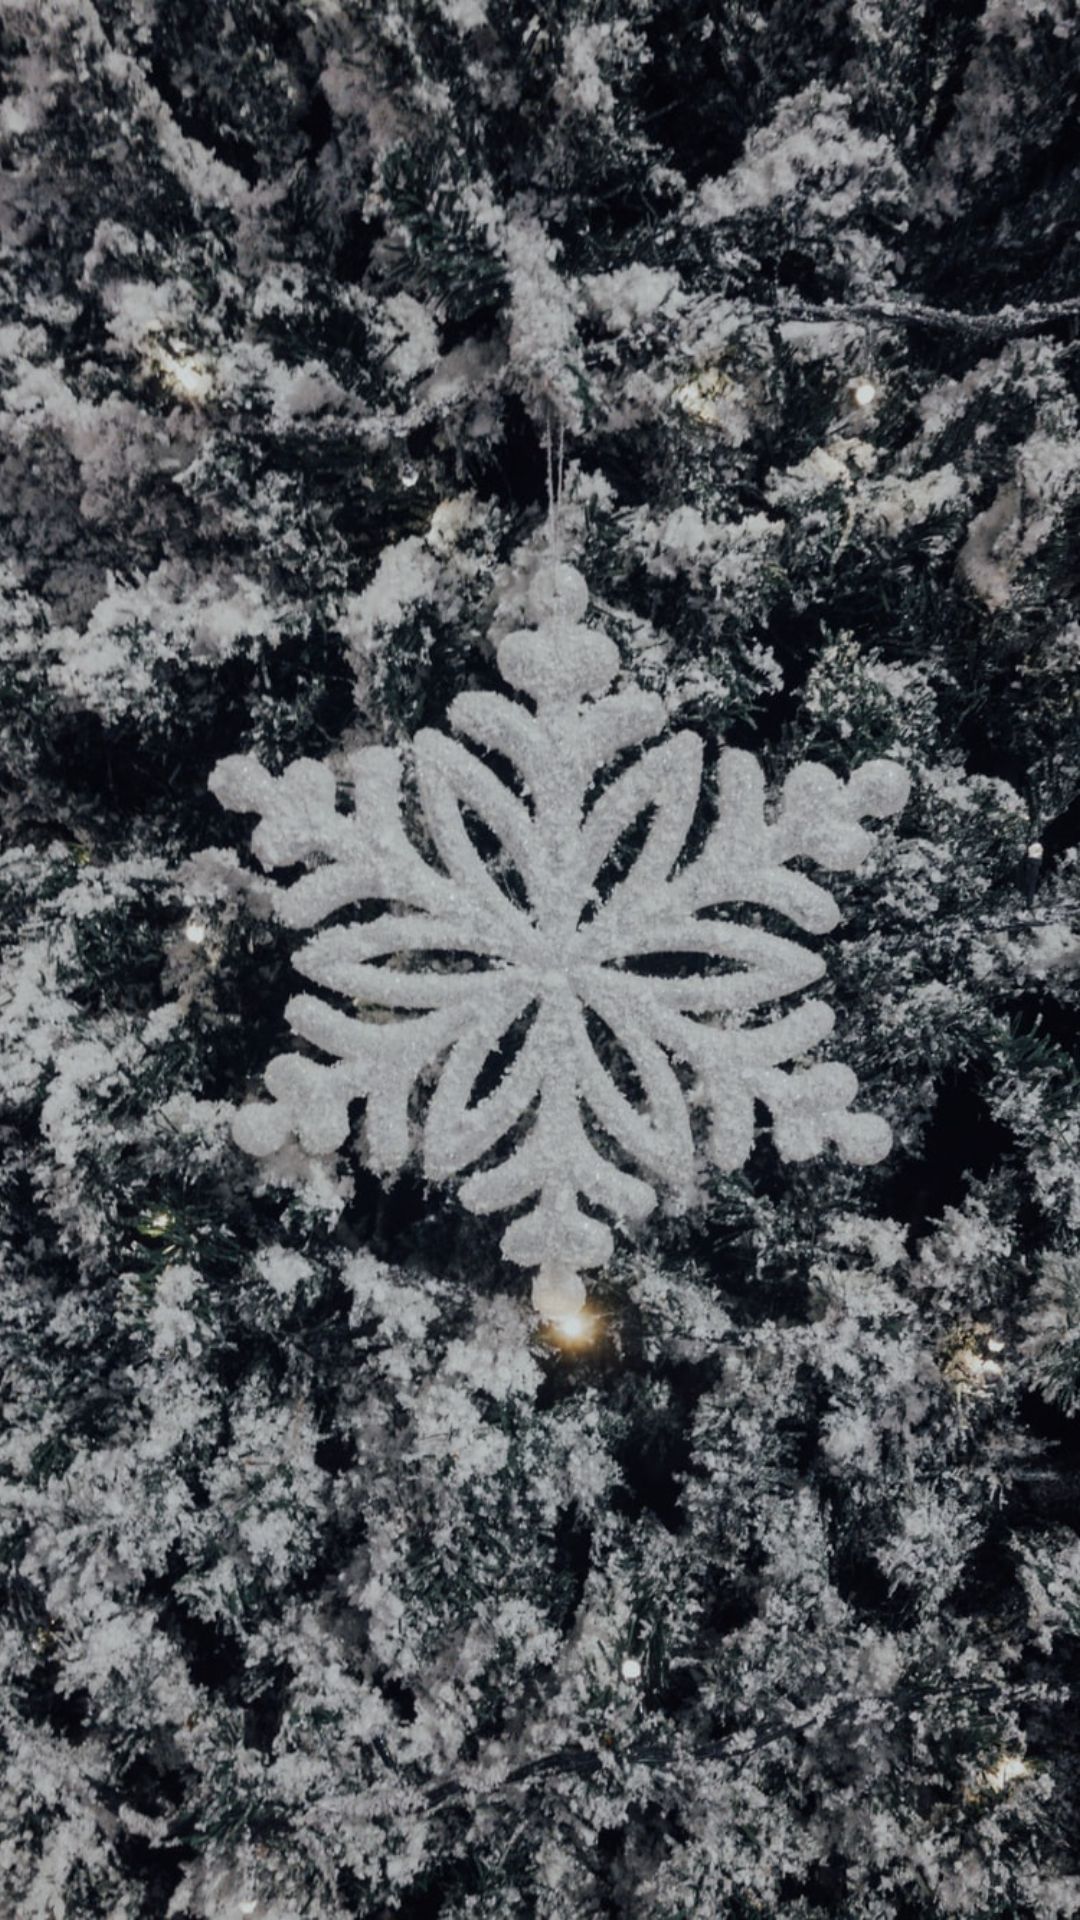 A snowflake ornament hanging from the branch of tree - Snowflake